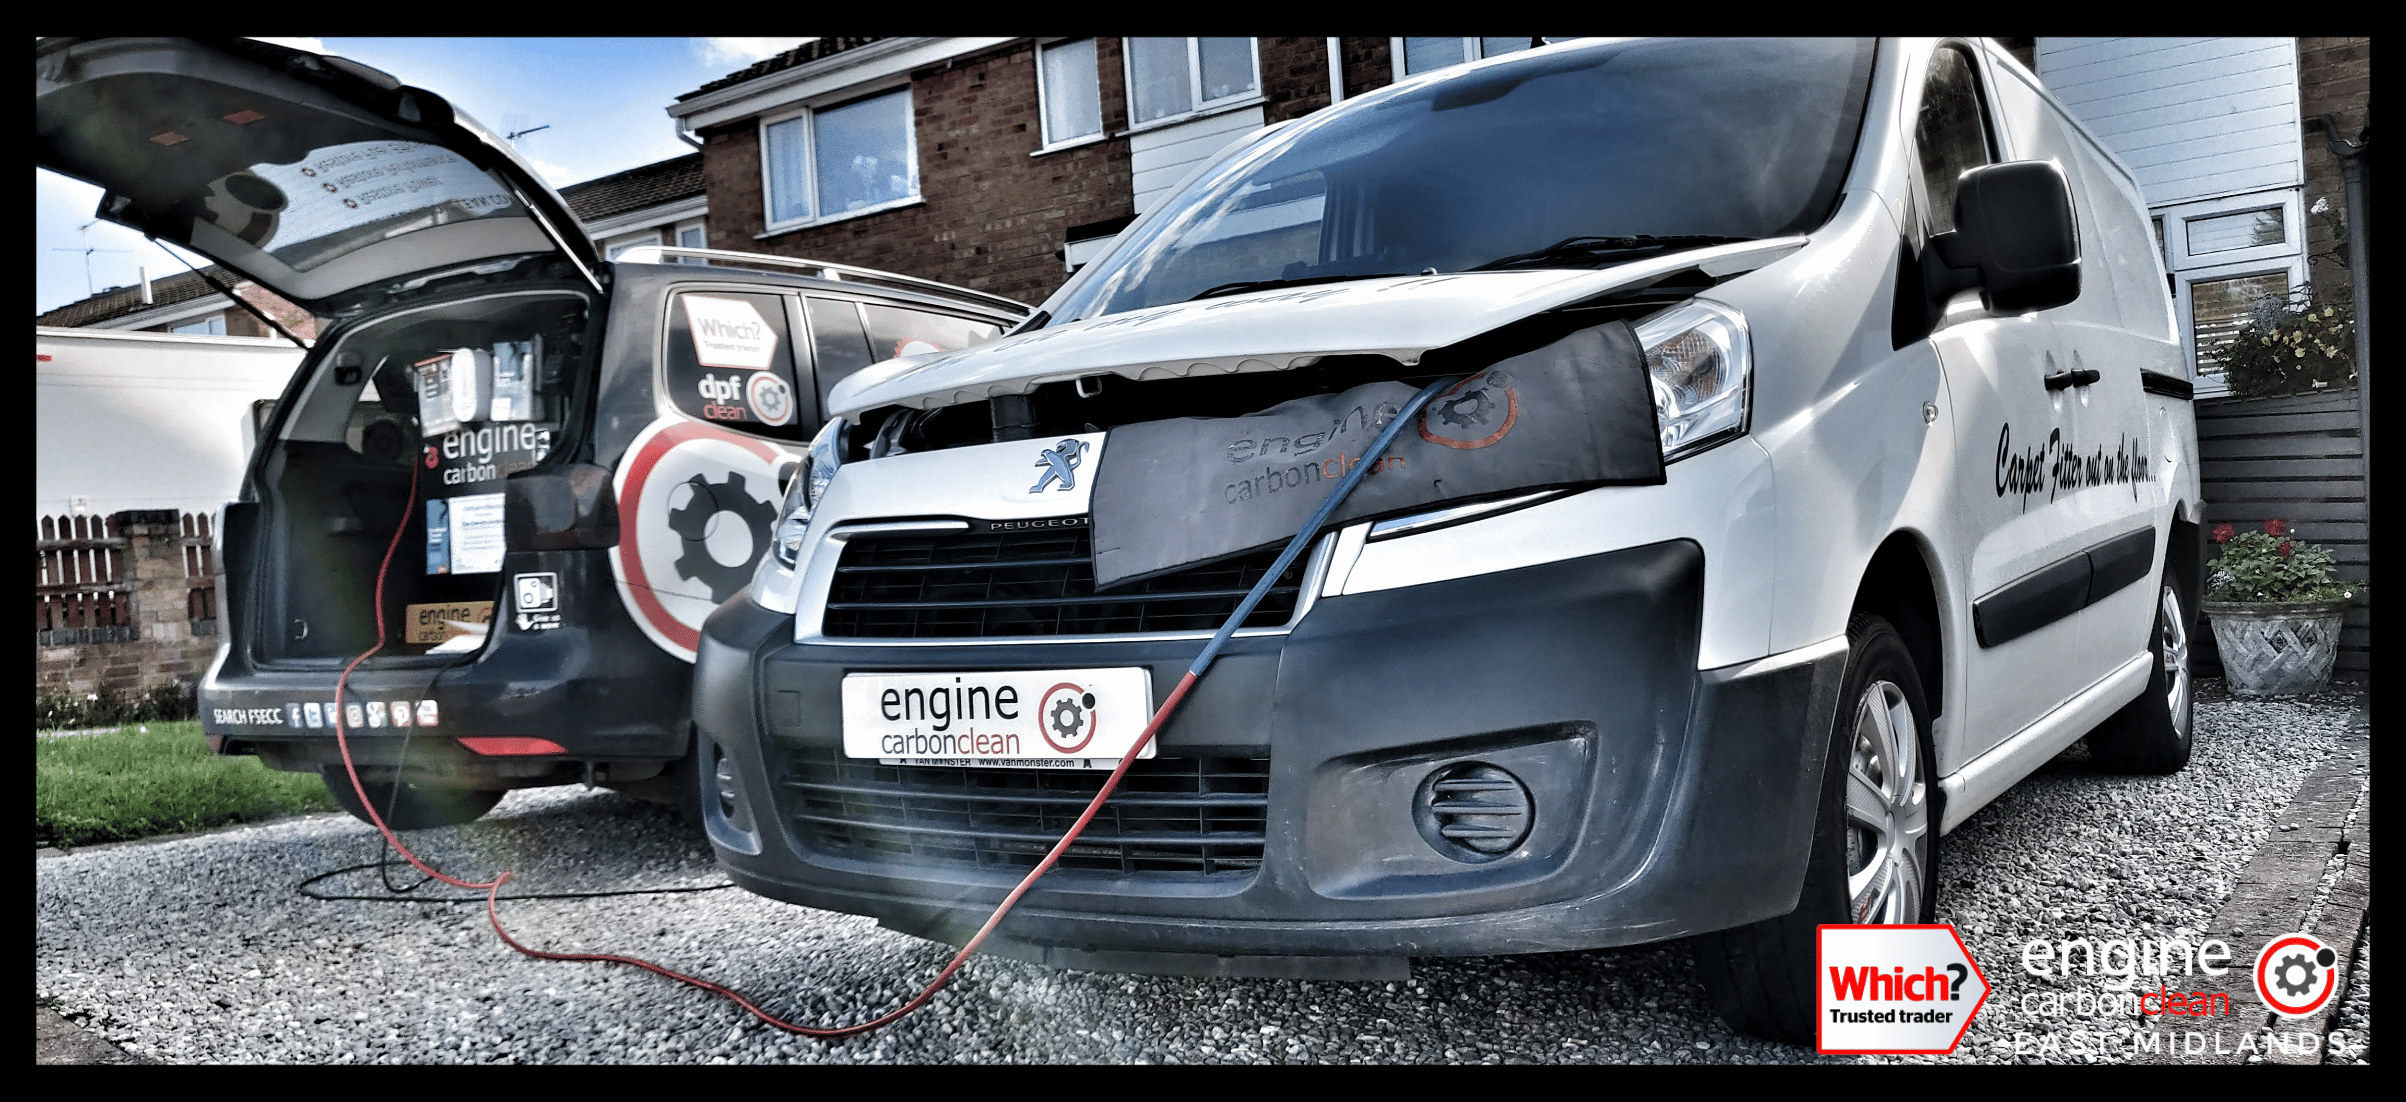 Pedal Sensors causing juddering on a Peugeot Expert 1.6 (2014 - 95,663 miles) - diagnostic and Engine Carbon Clean